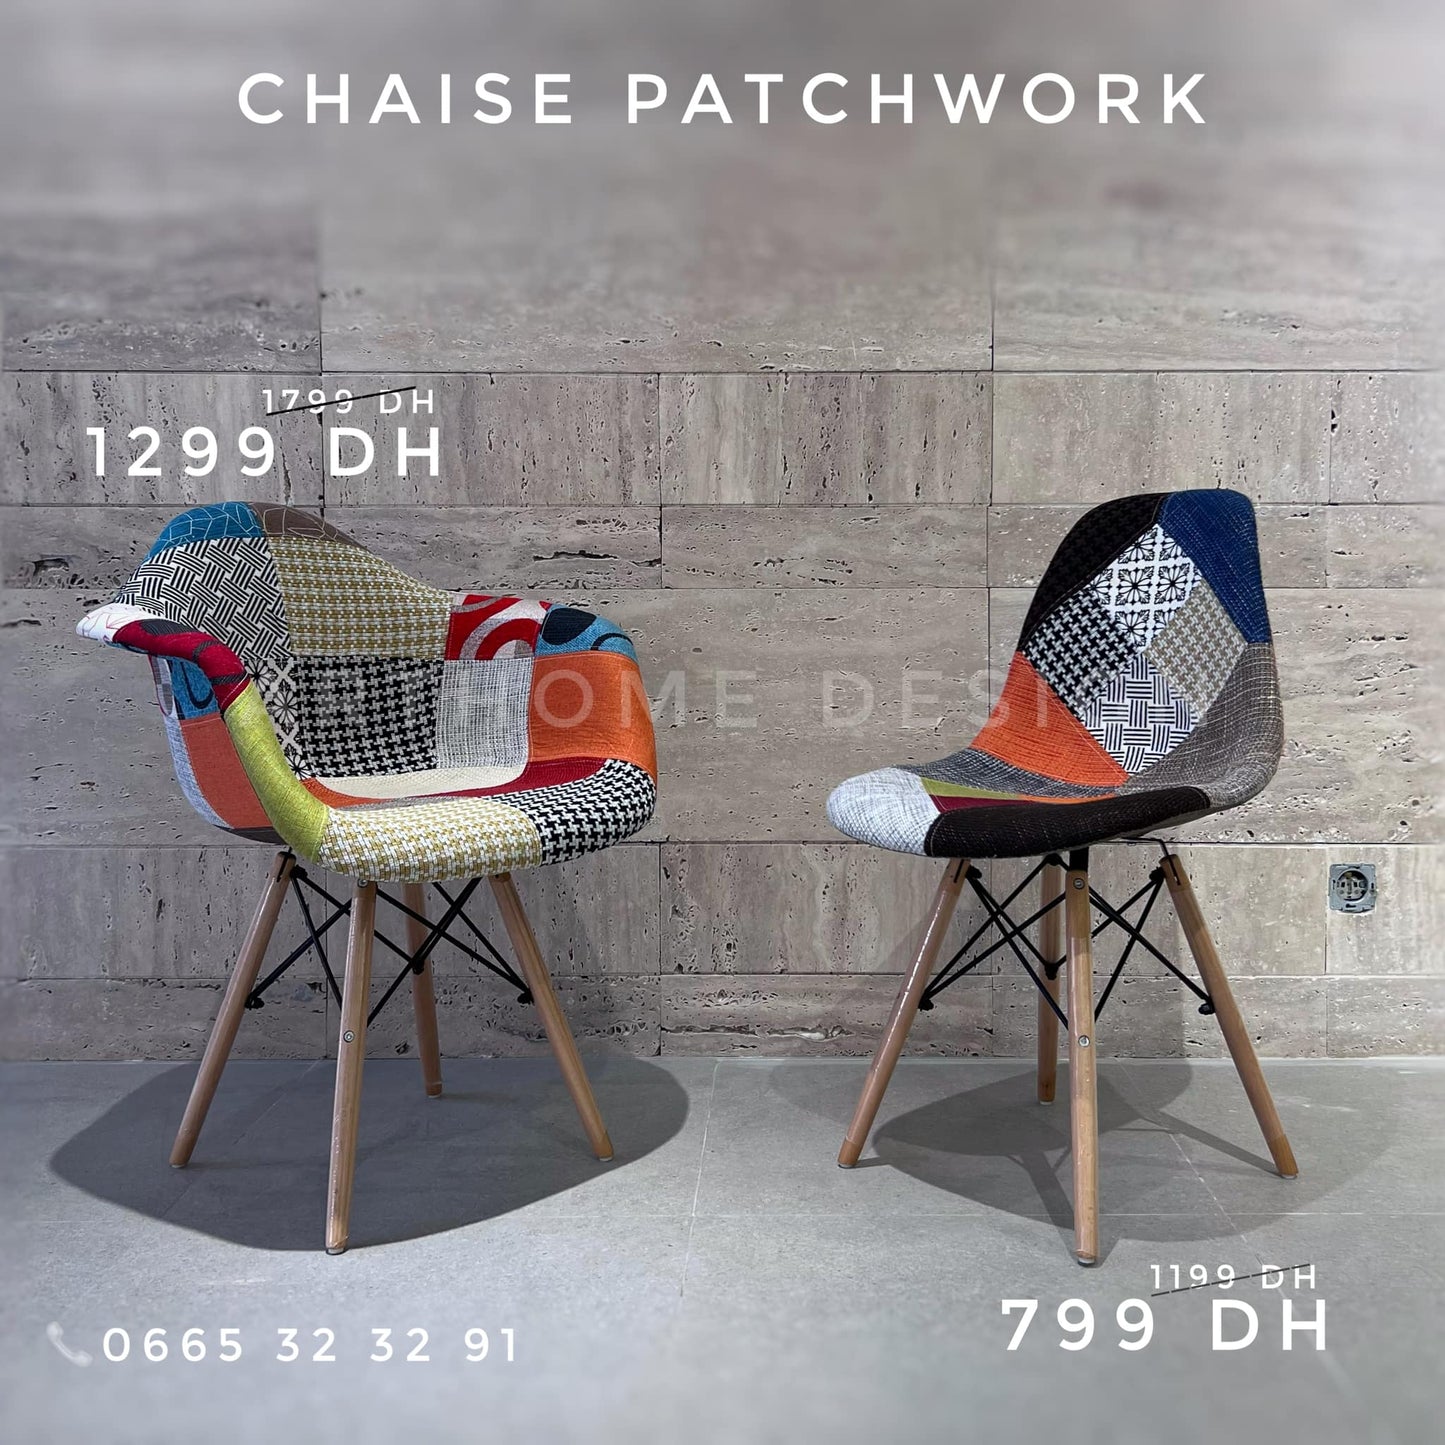 CHAISE PATCHWORK